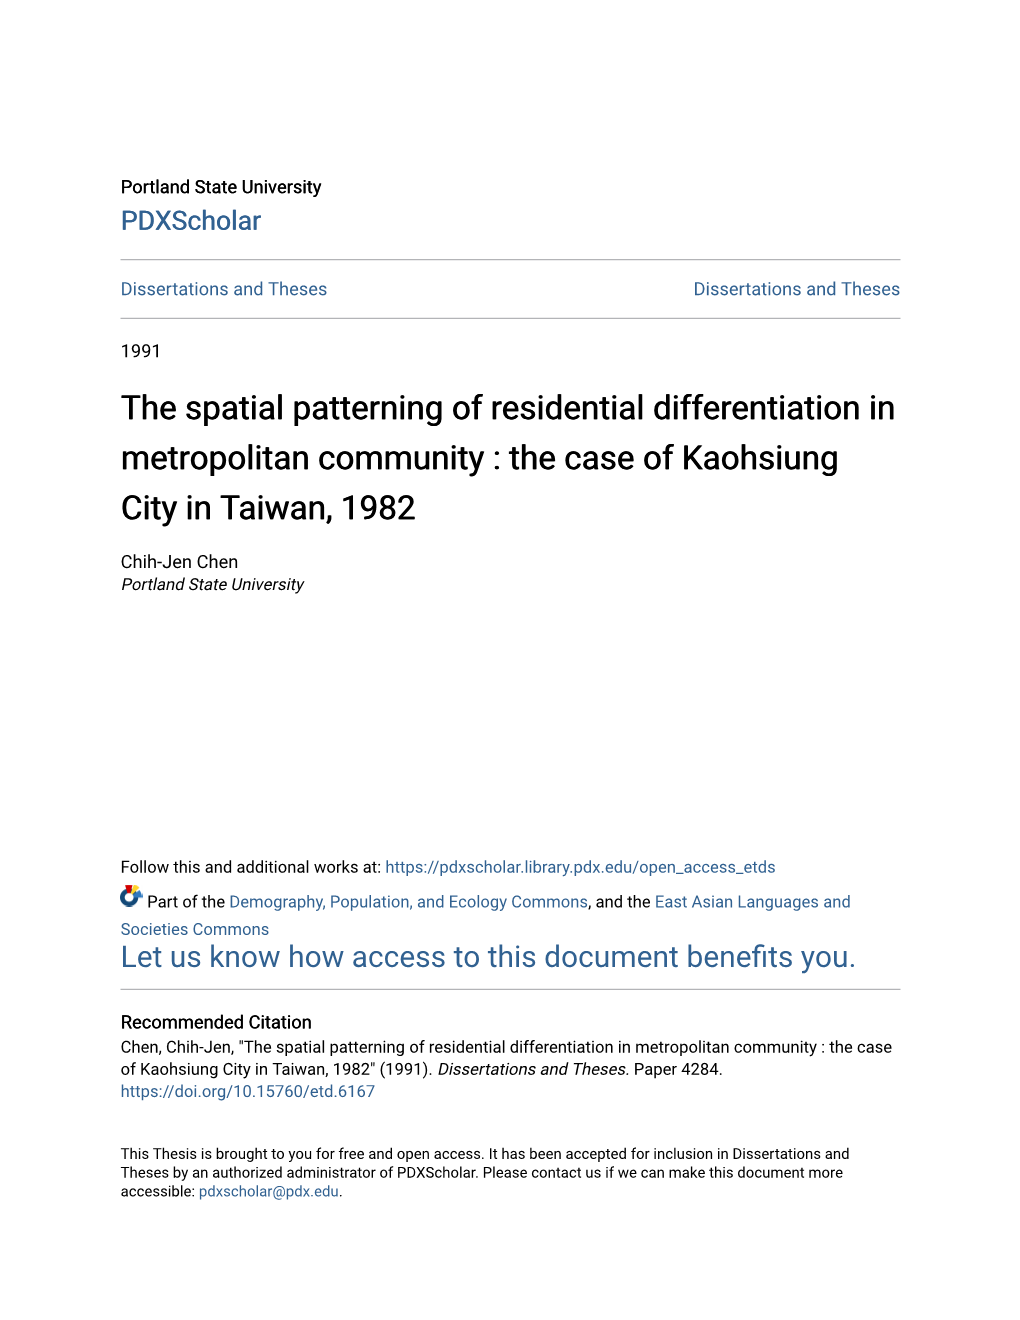 The Case of Kaohsiung City in Taiwan, 1982